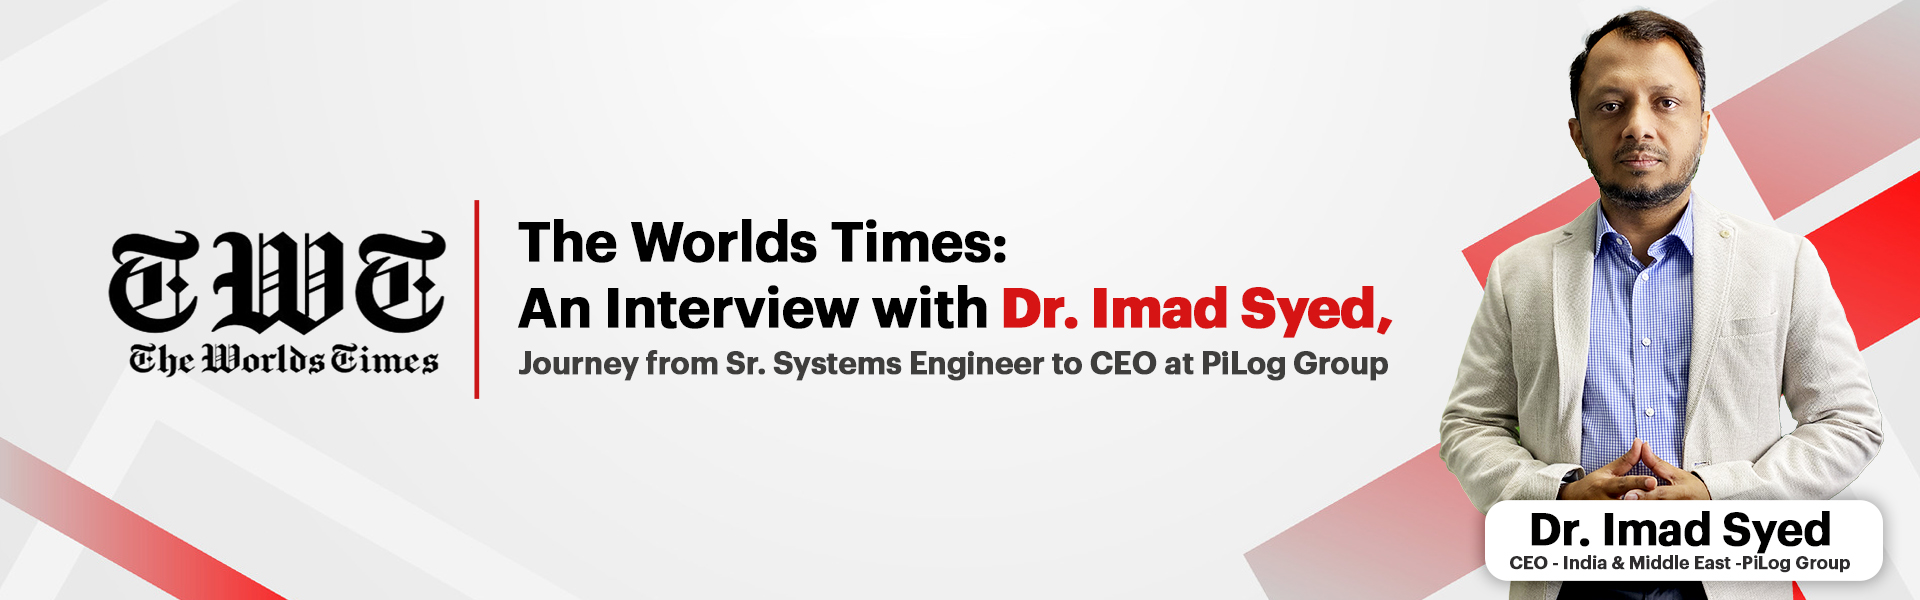 Worlds Times Dr Imad Syed CEO Middle East APAC